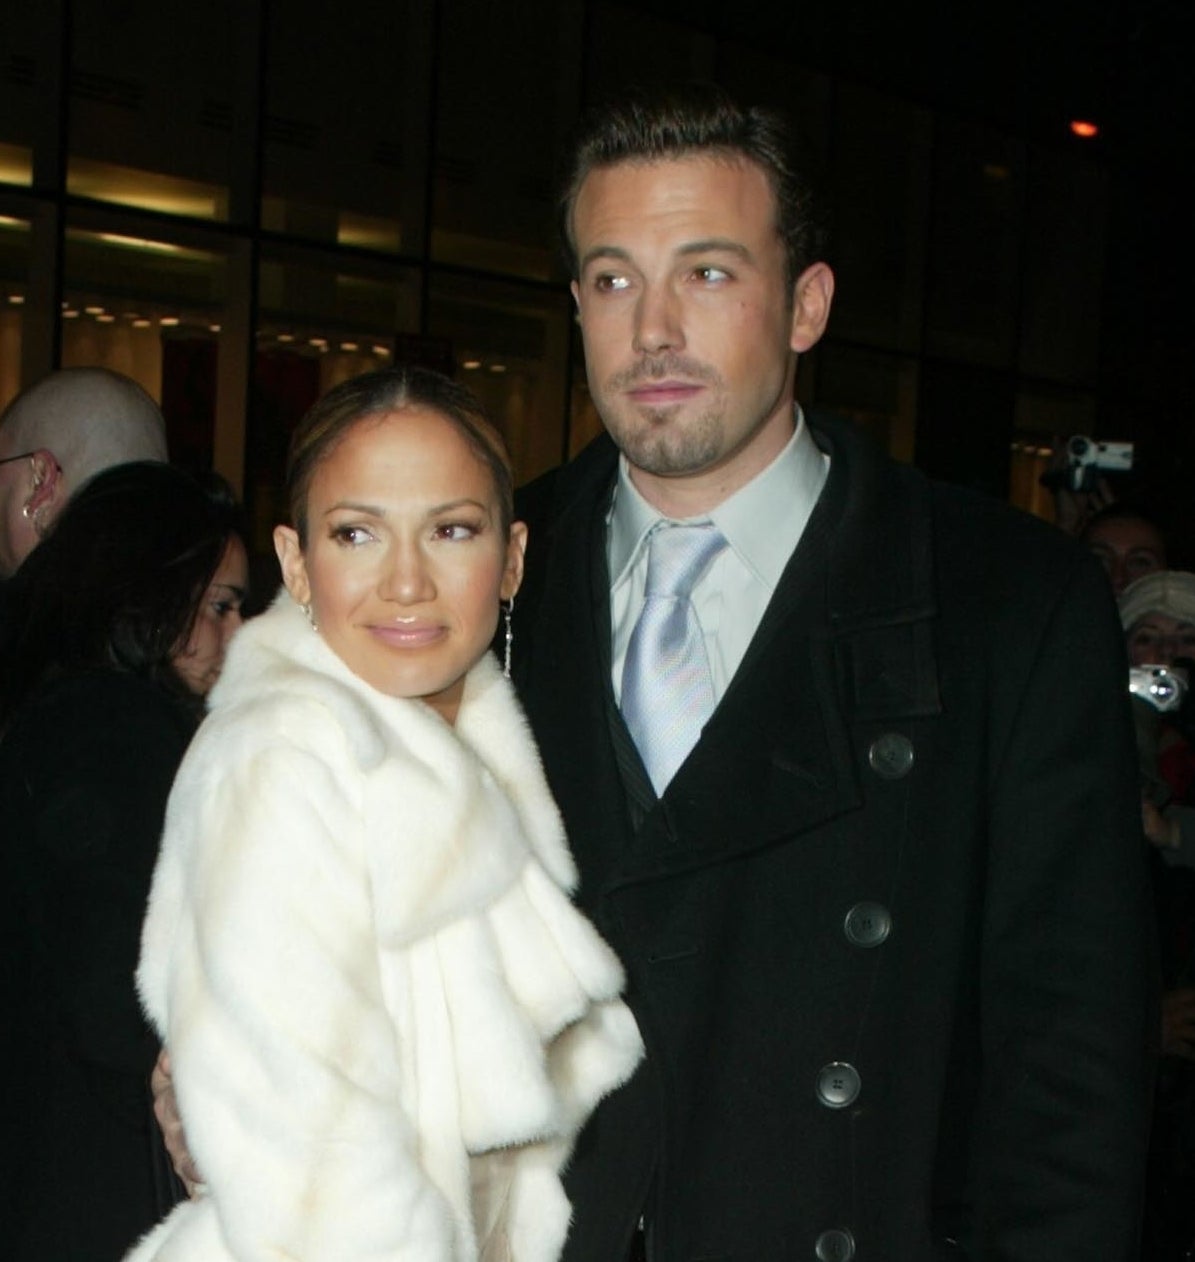 Close-up of JLo in a furry jacket and Ben in a suit and tie and his arm around her